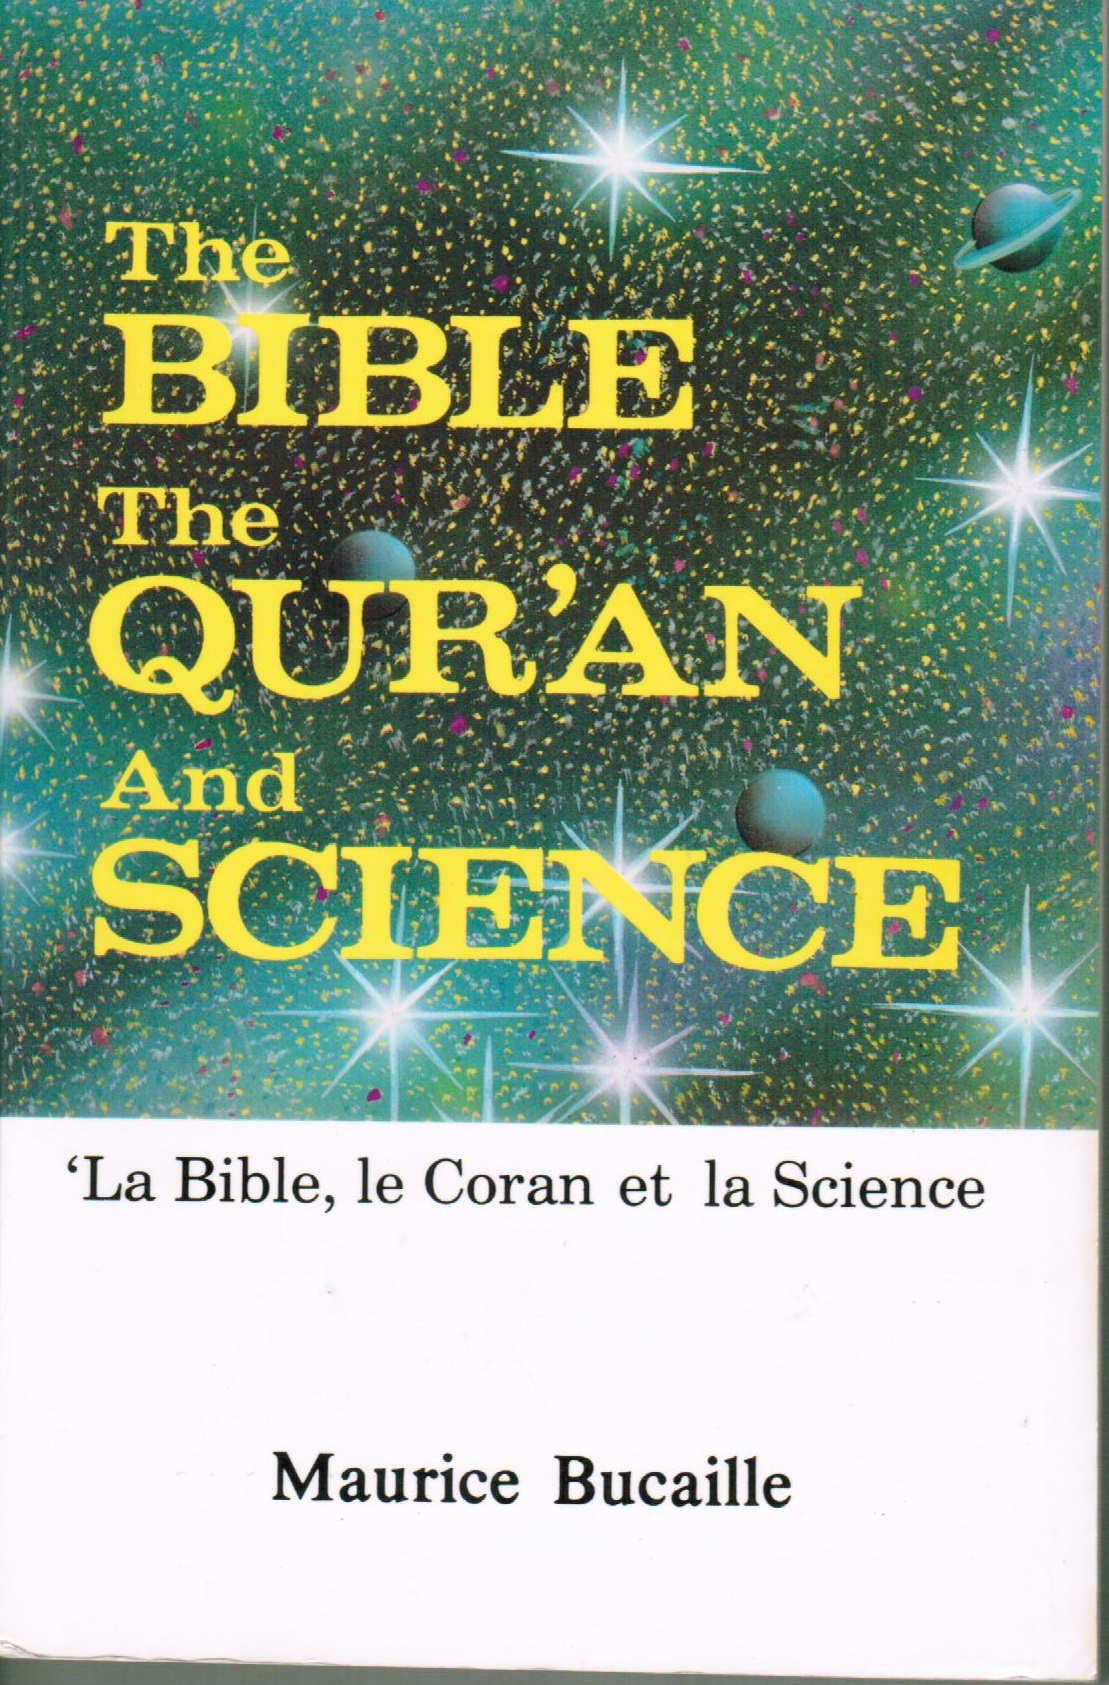 speech on quran and science